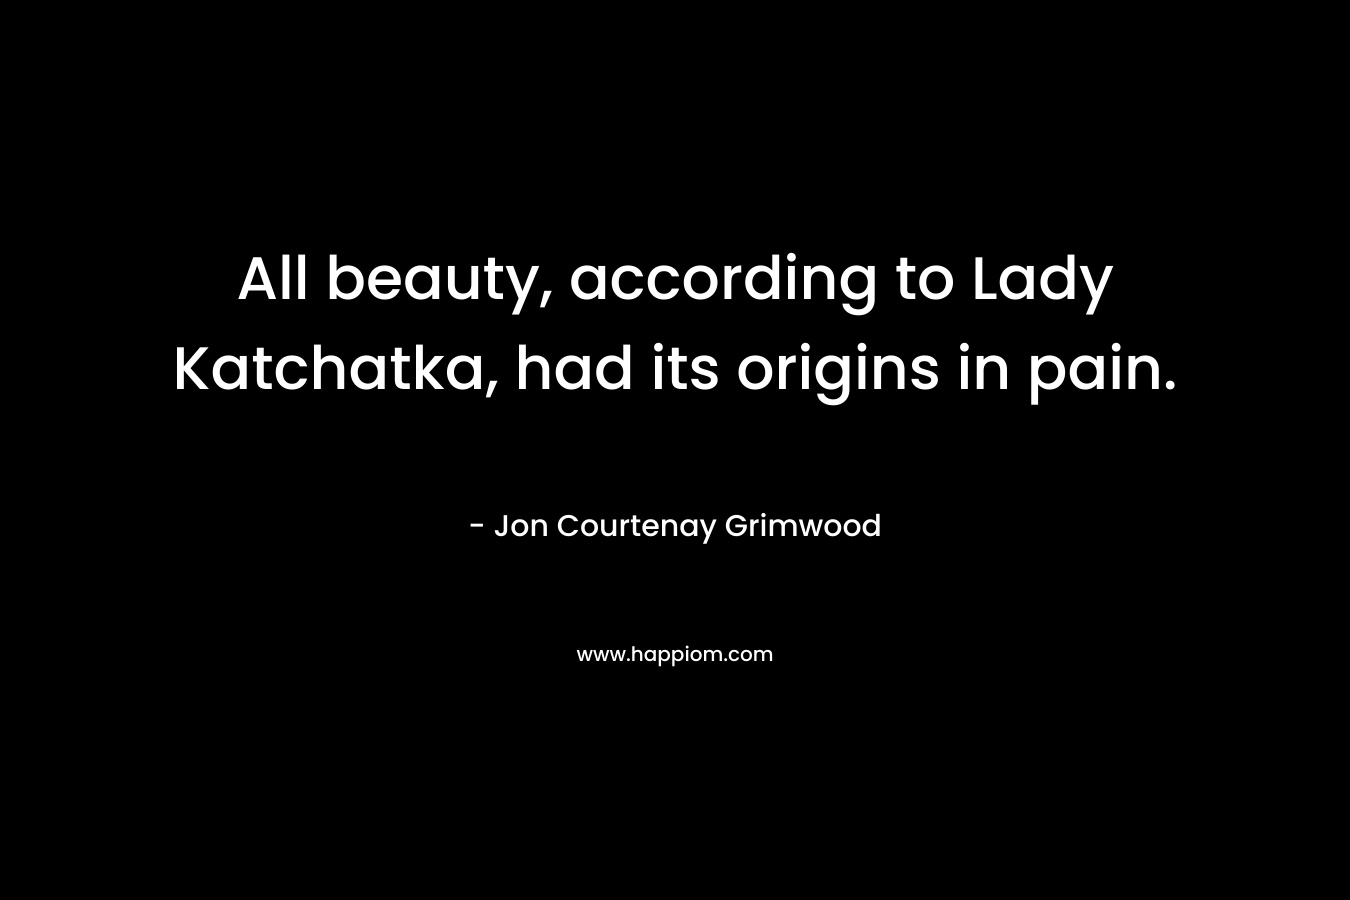 All beauty, according to Lady Katchatka, had its origins in pain. – Jon Courtenay Grimwood